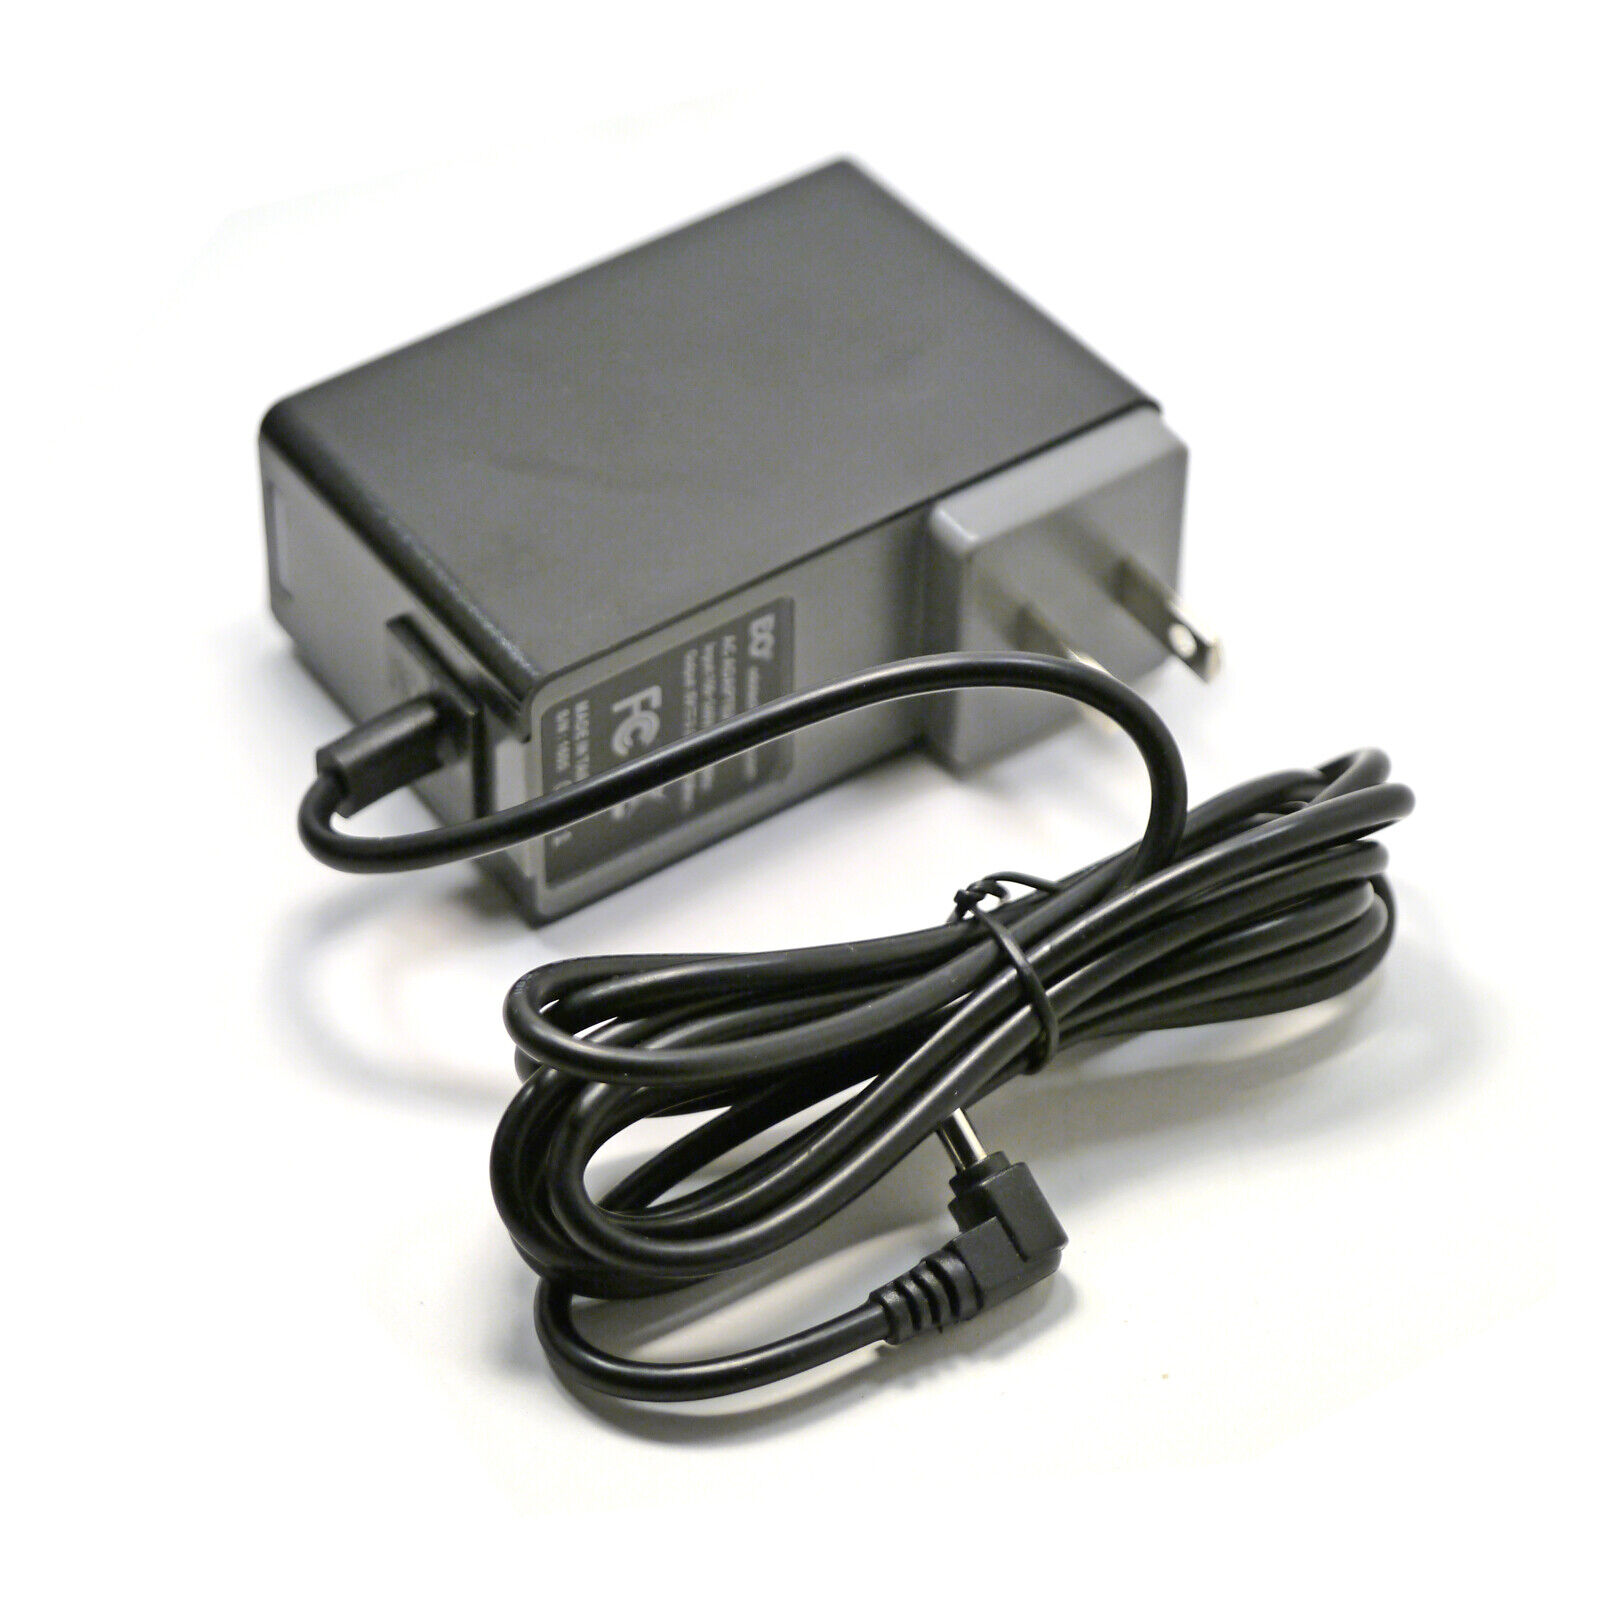 19V AC Wall Charger for Acer Aspire One A110 AOA110 D150 D250 KAV10 KAV60 Laptop